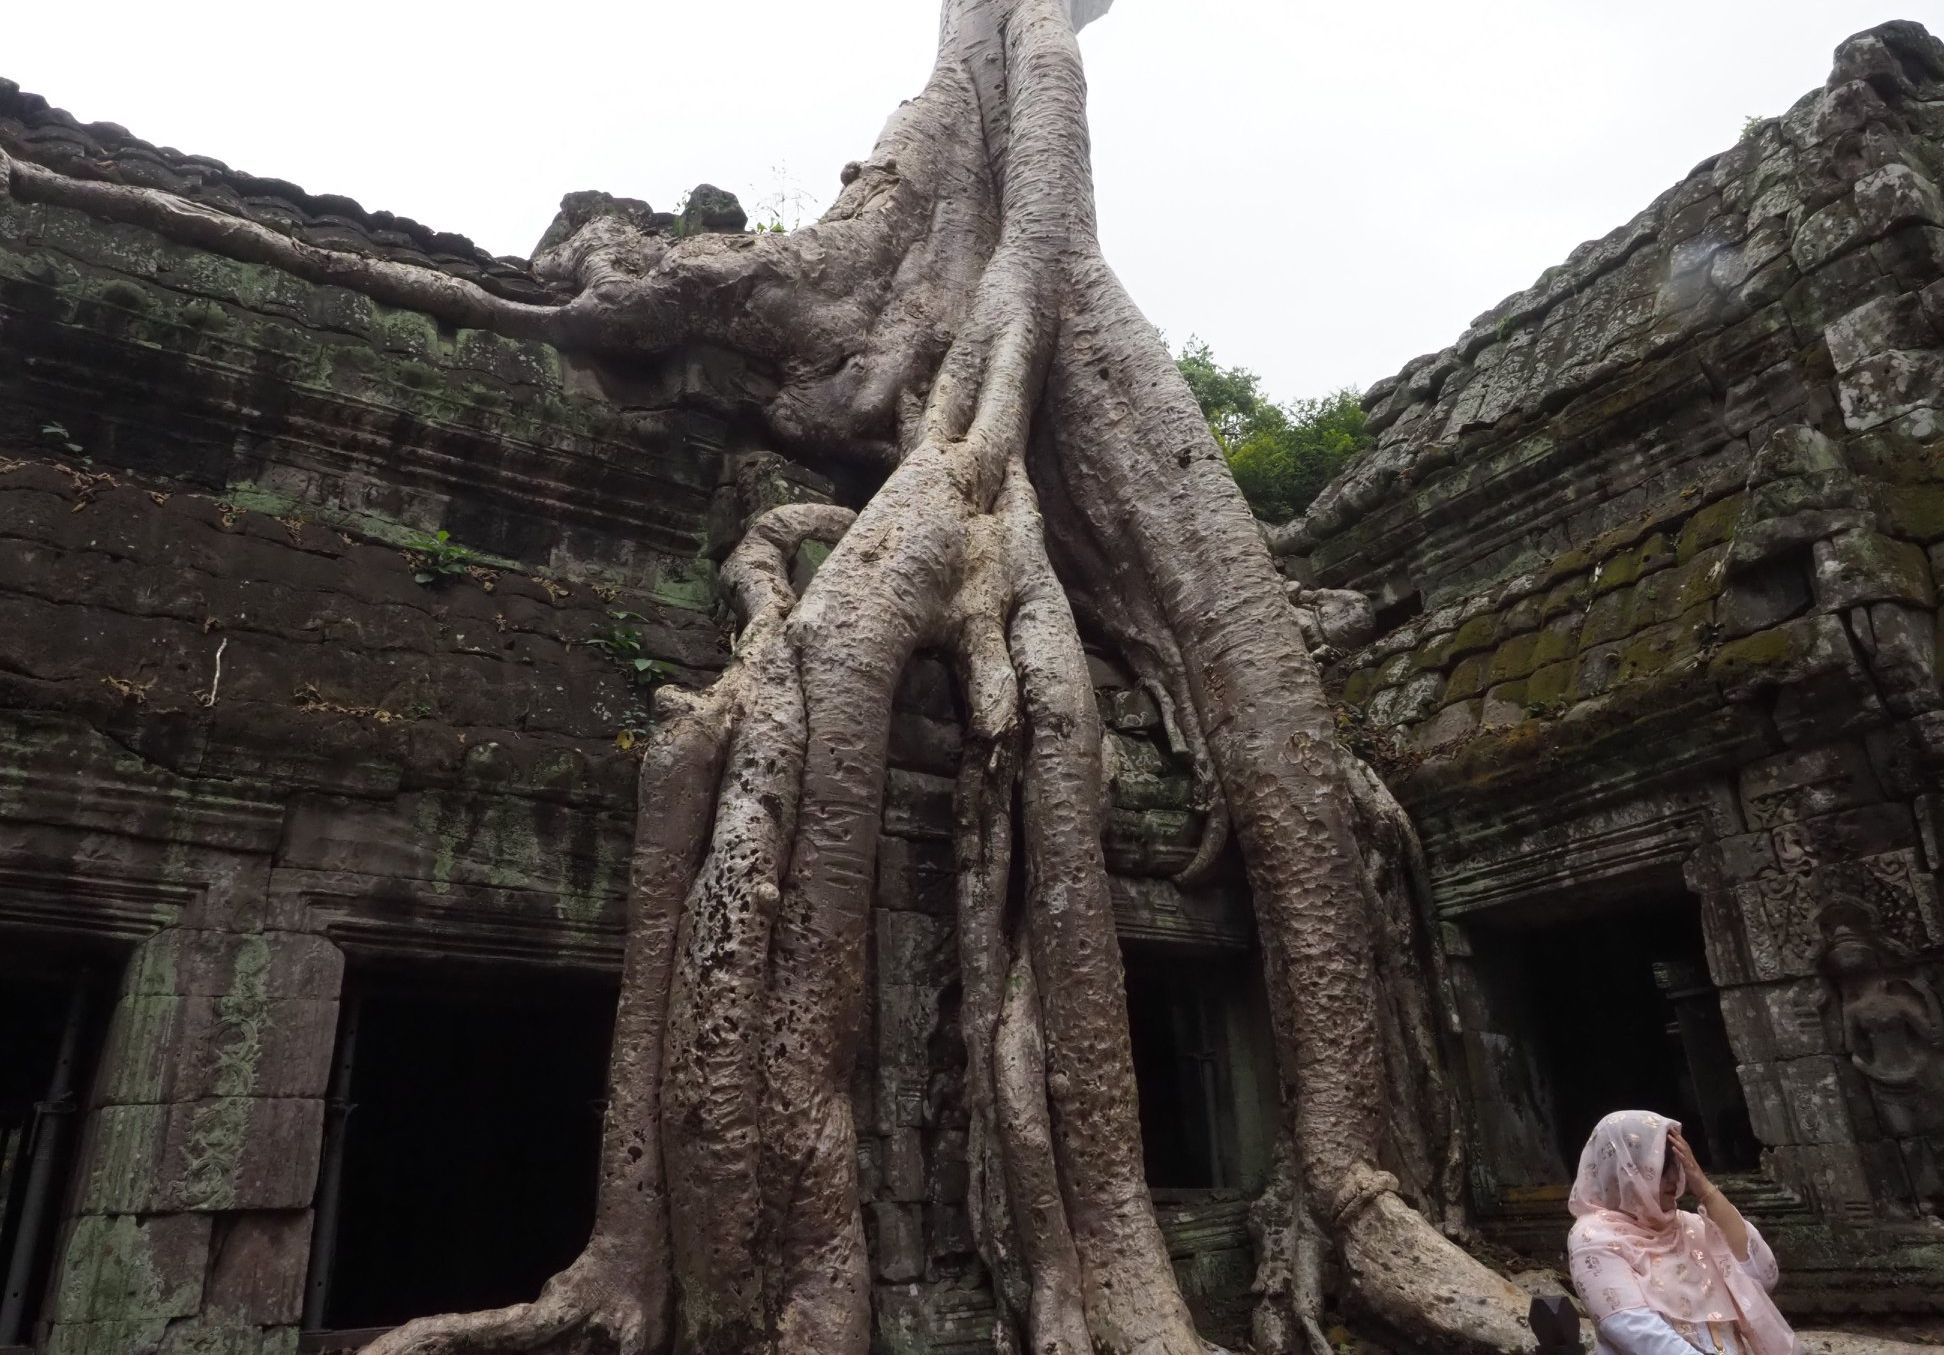 Tree Roots overgrowing Ta Prohm Temple at Siem Reap in northern Cambodia